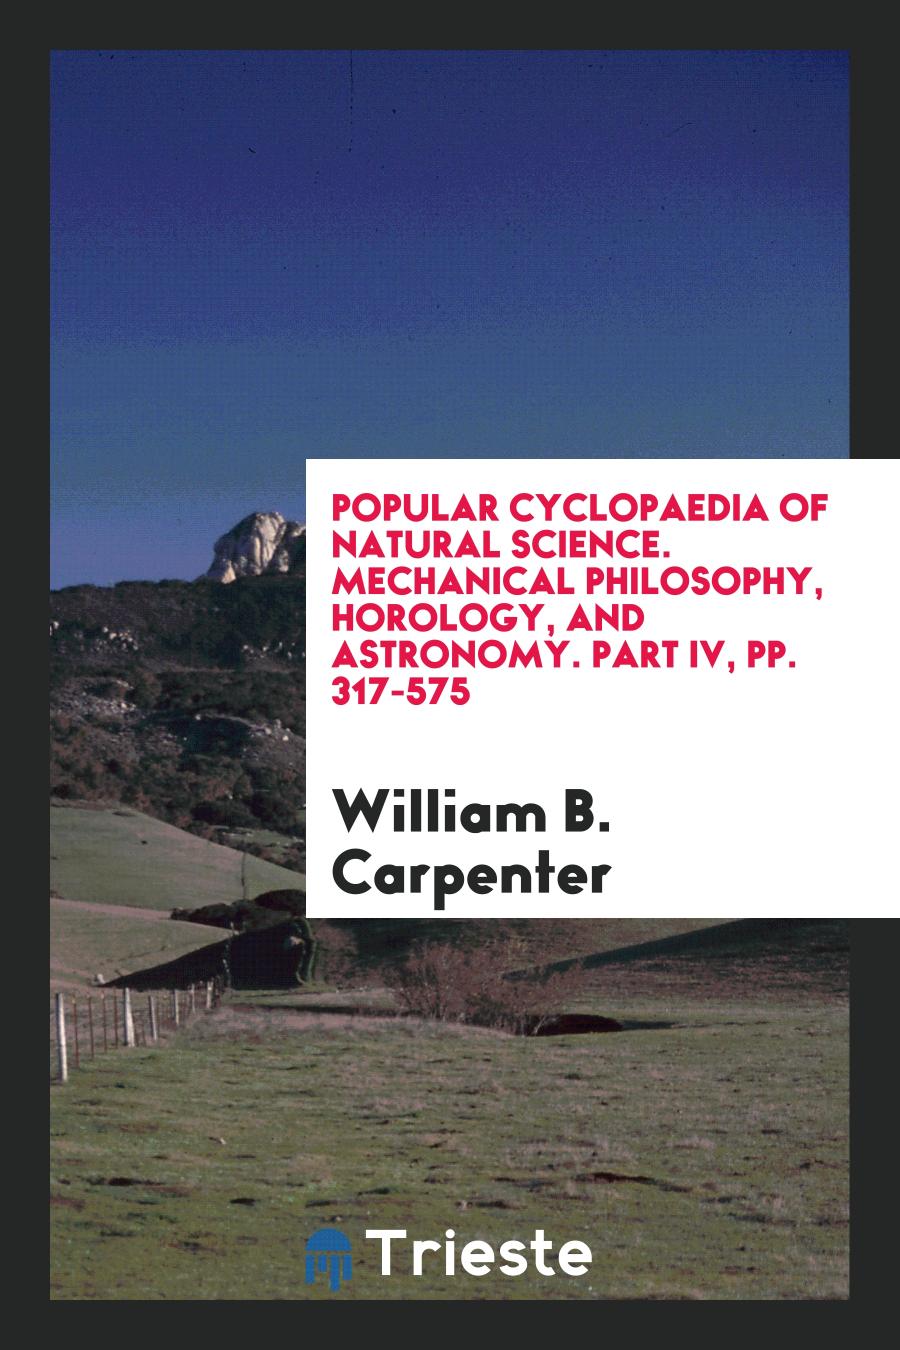 Popular Cyclopaedia of Natural Science. Mechanical Philosophy, Horology, and Astronomy. Part IV, pp. 317-575